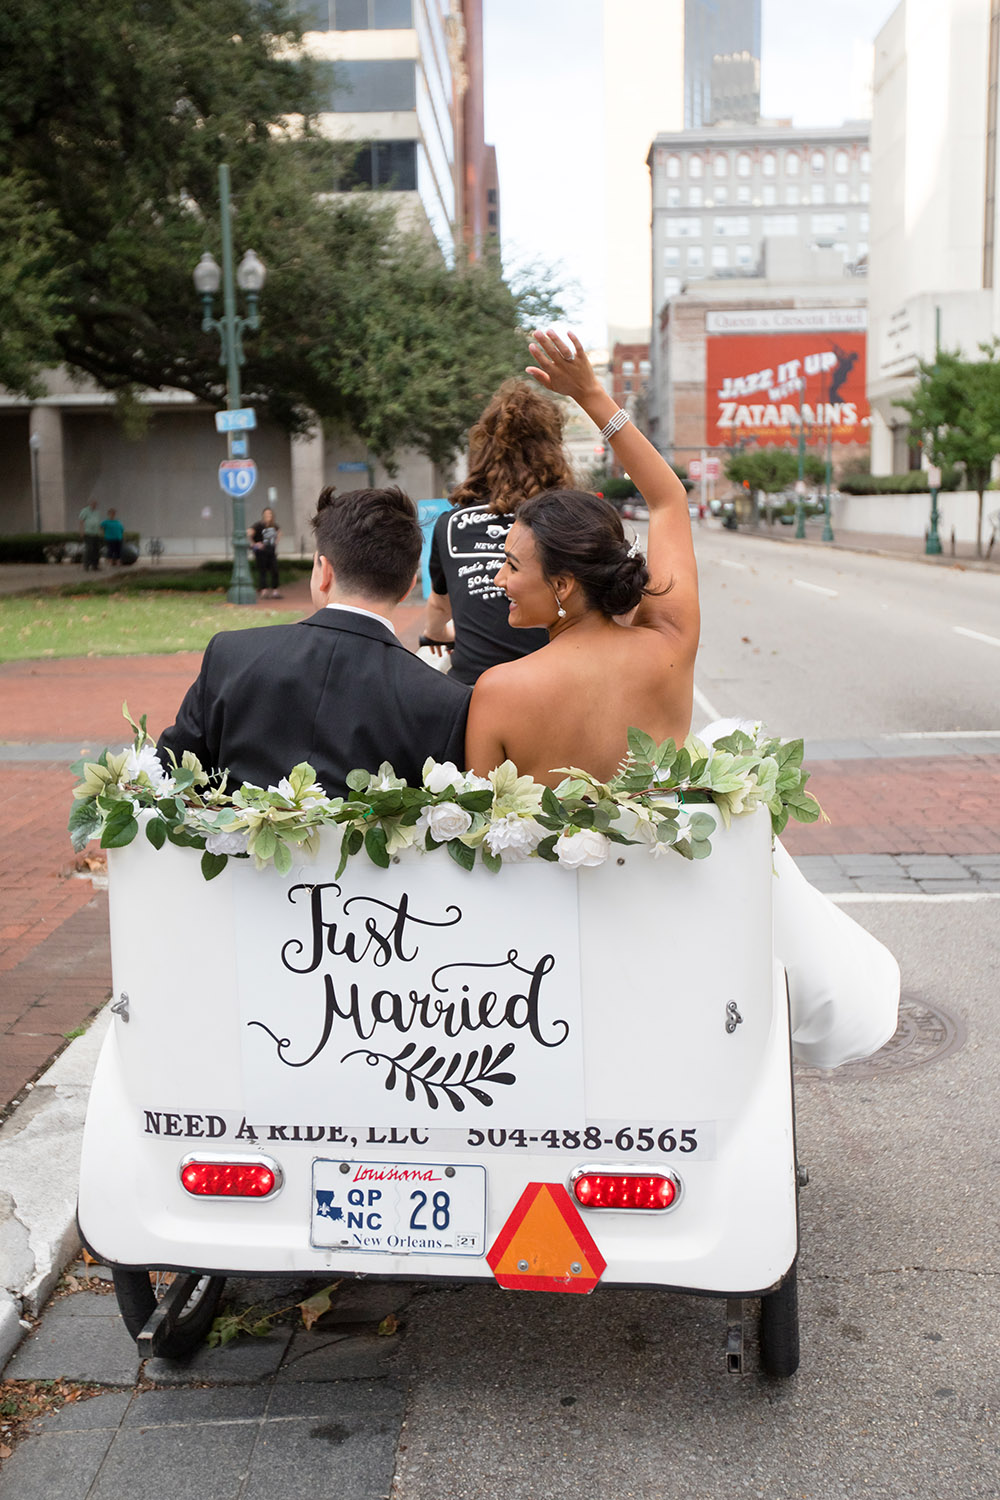 The bride and groom ride in a pedicab to their reception